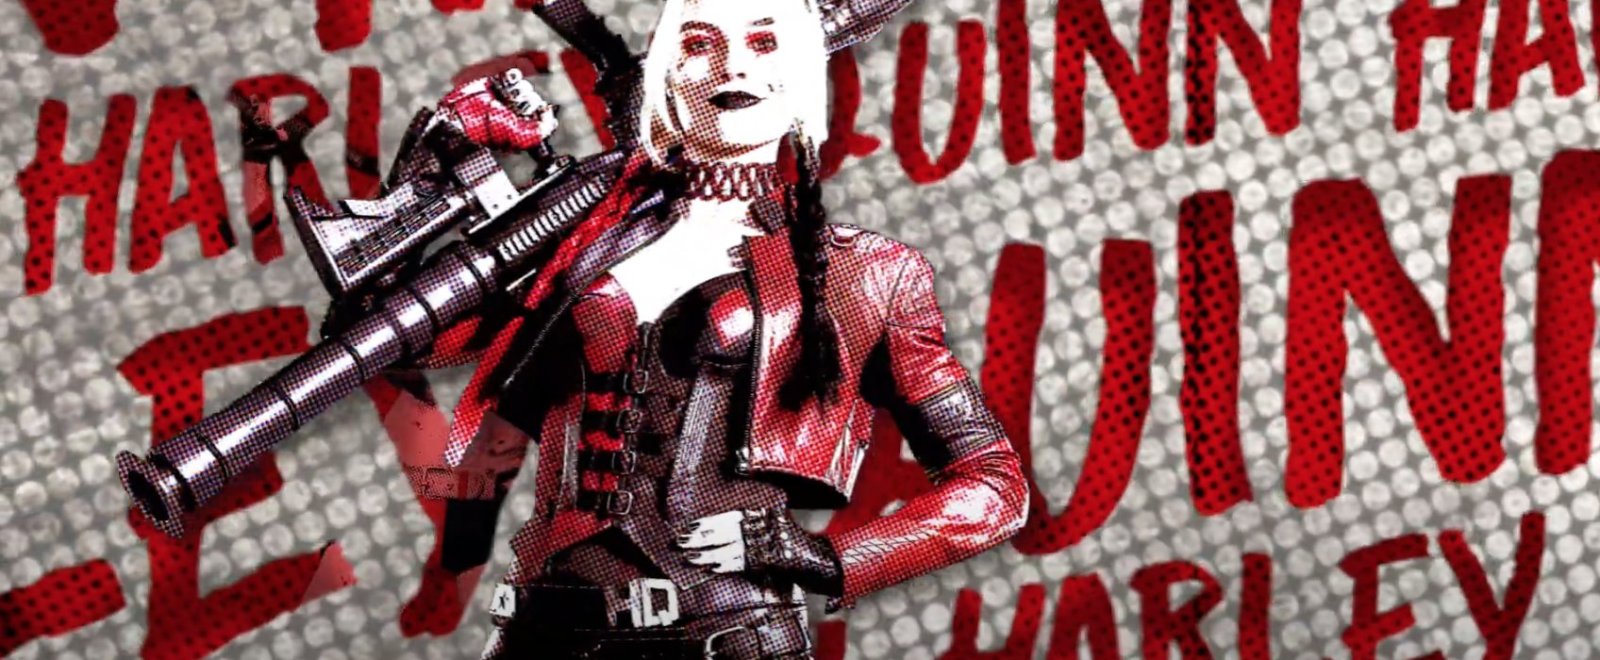 Margot Robbie and More Suicide Squad Stars Returning for James